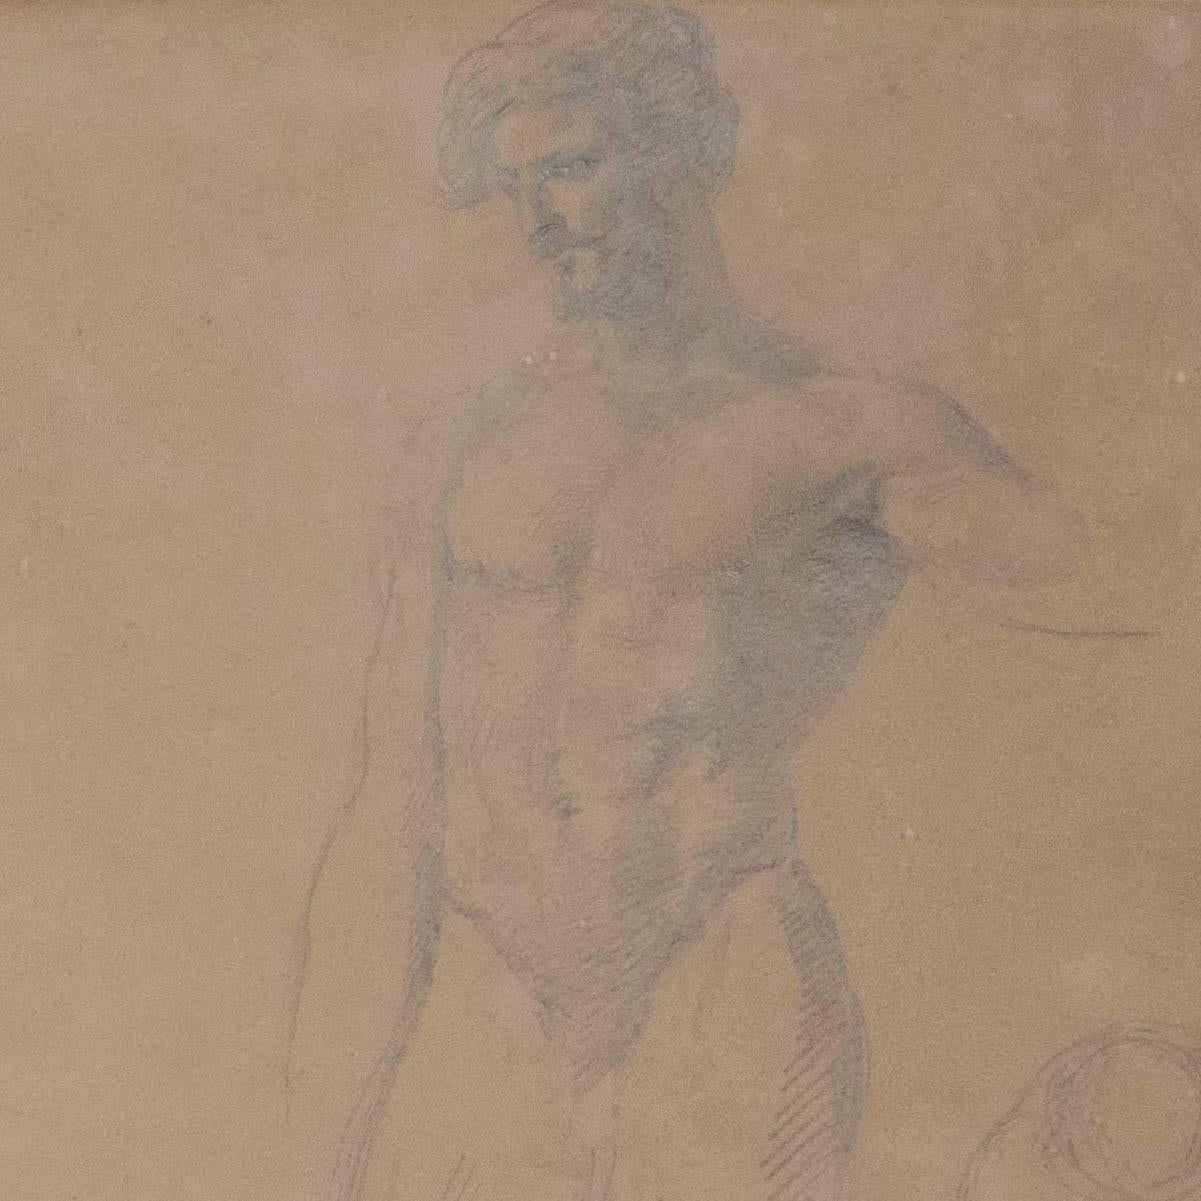 A handsome pair of early to mid-19th century Old Master style academic studies of nude men, pencil on paper, each measuring approximately 10 x 14 in (25 x 35.5 cm)
Unsigned, probably Italy or France.

Currently mounted in modern black-stained wooden